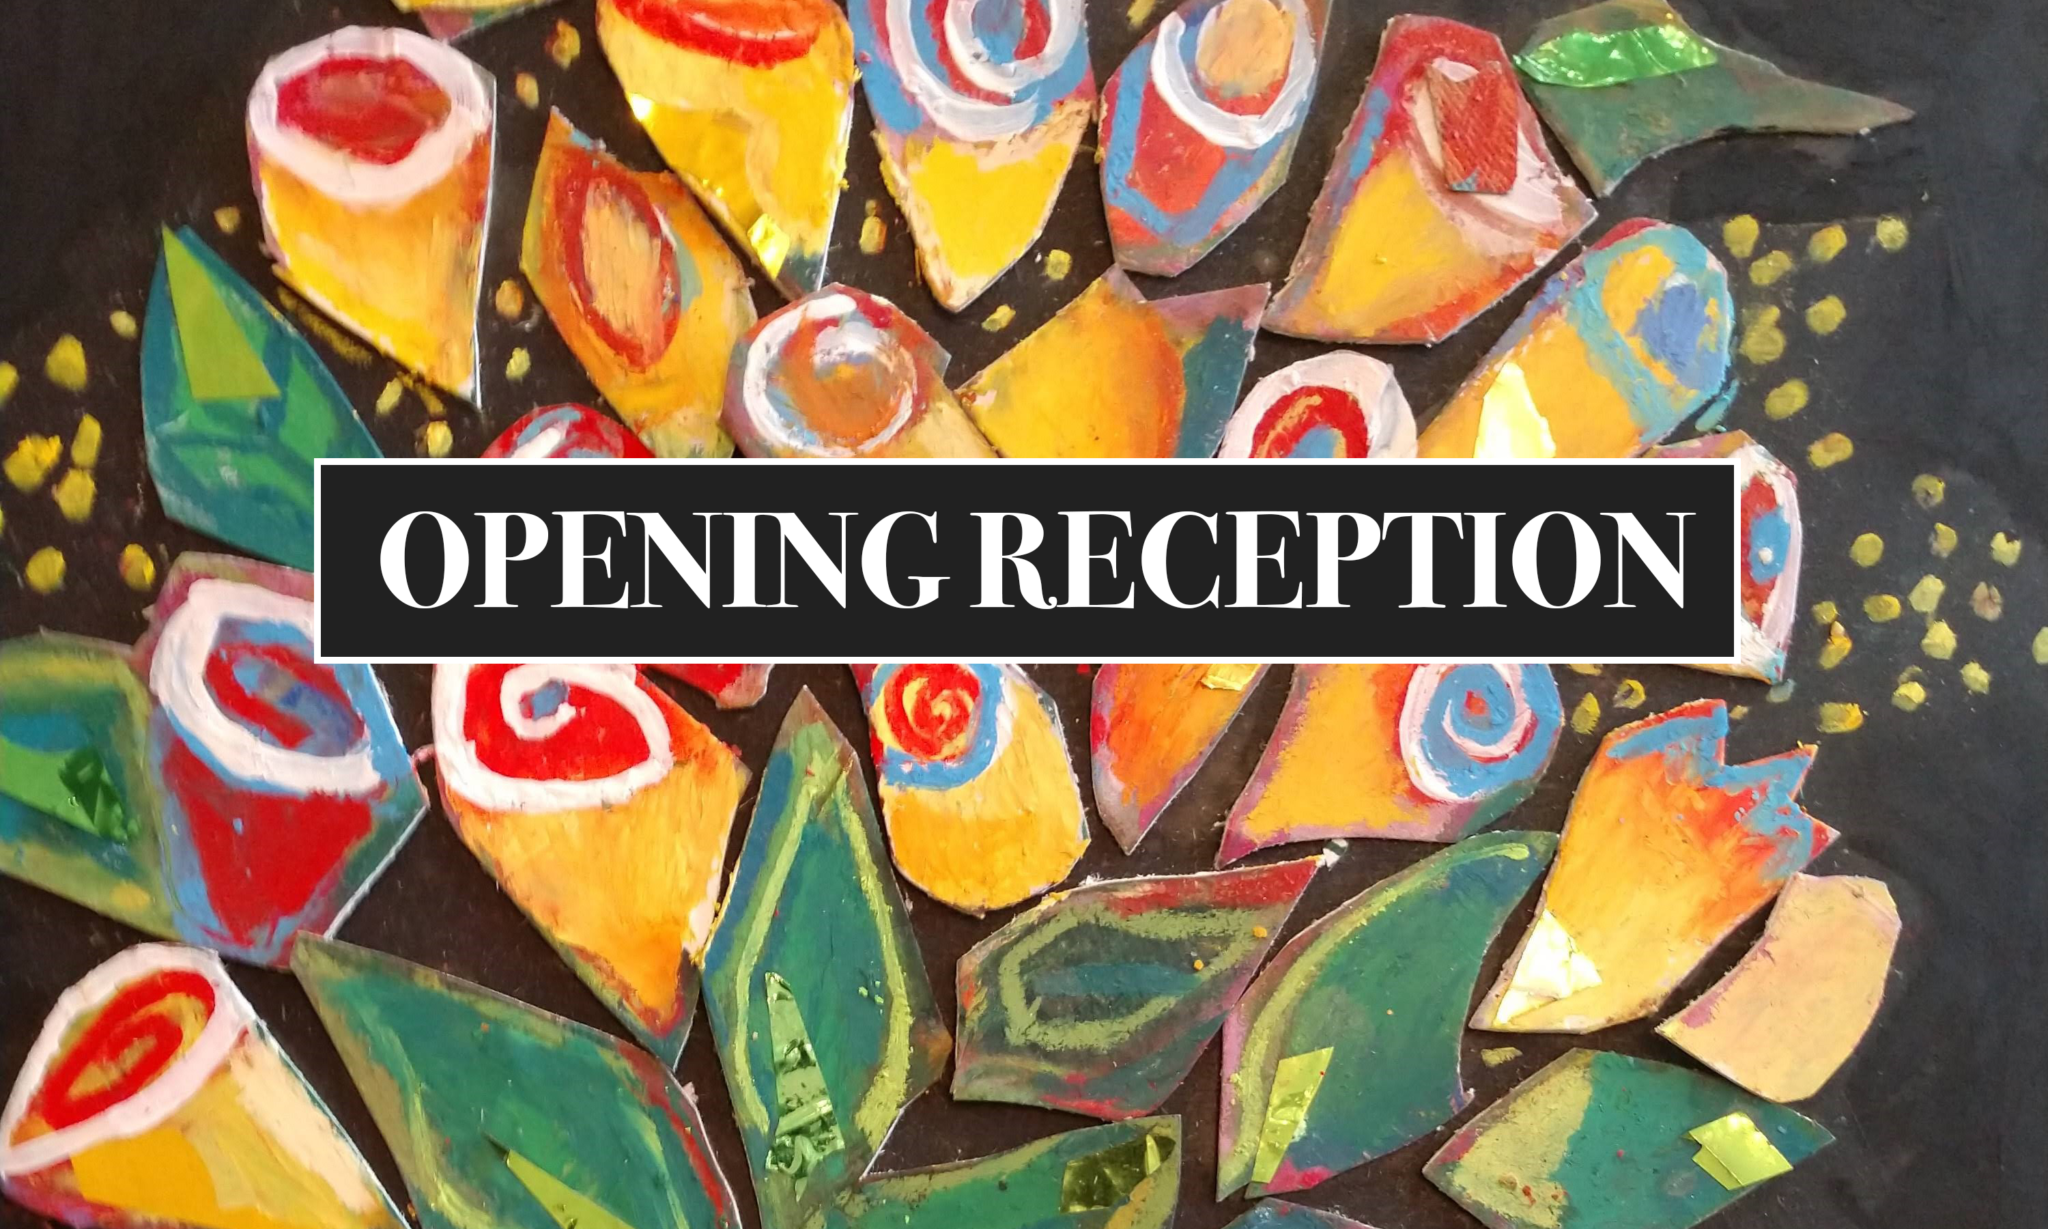 Curator as Artist Gallery Show Opening Reception at Spencertown Academy